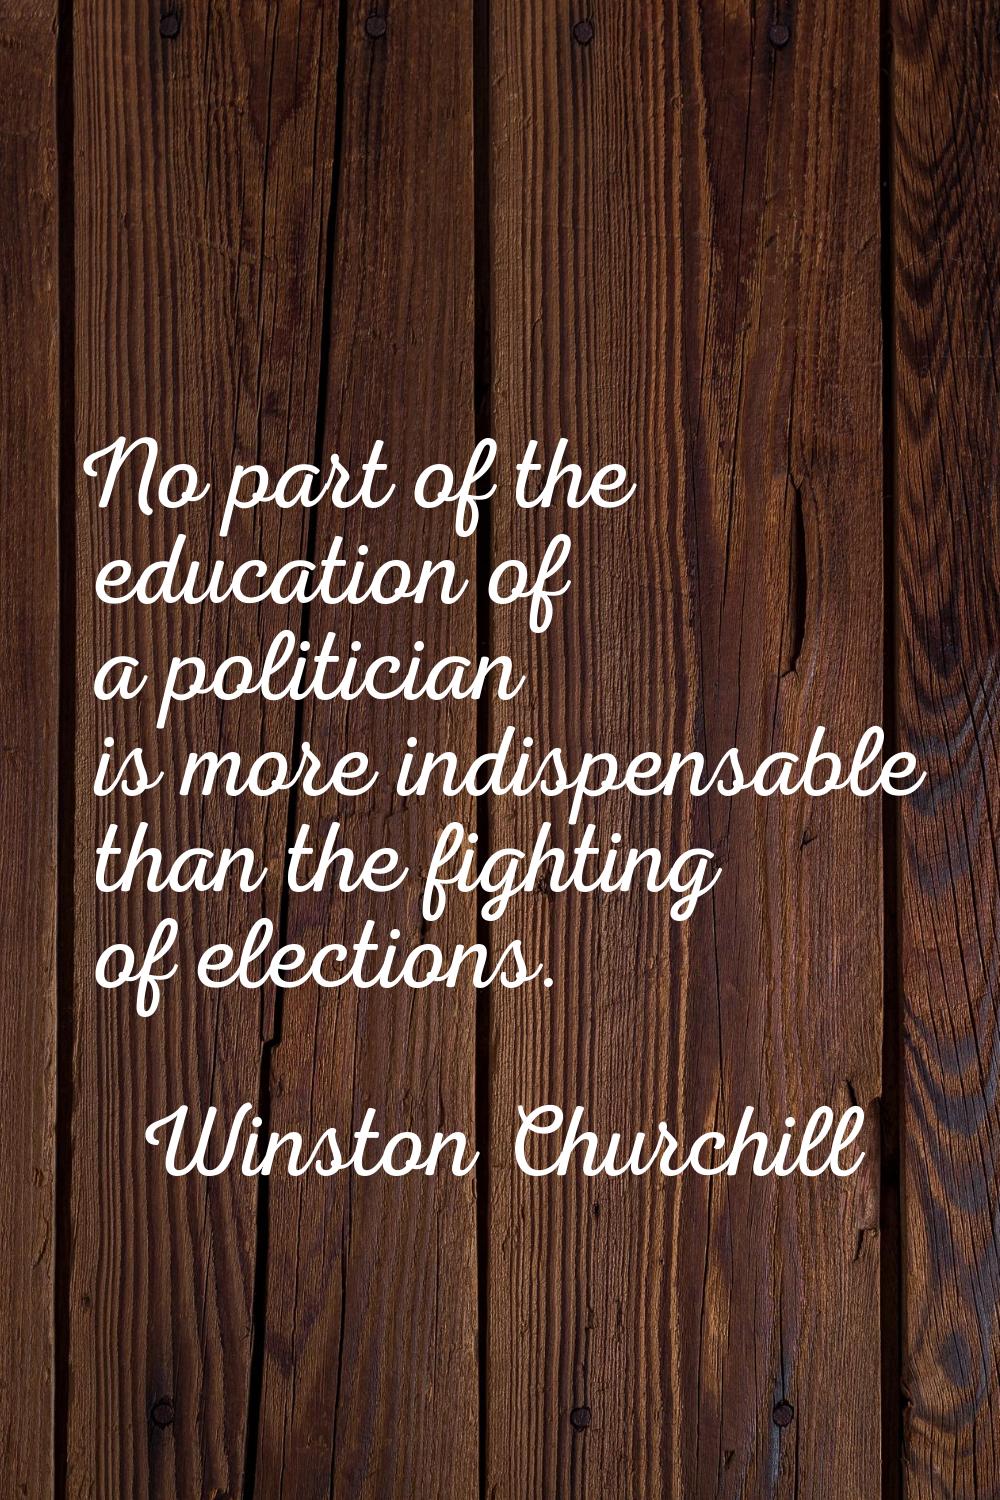 No part of the education of a politician is more indispensable than the fighting of elections.